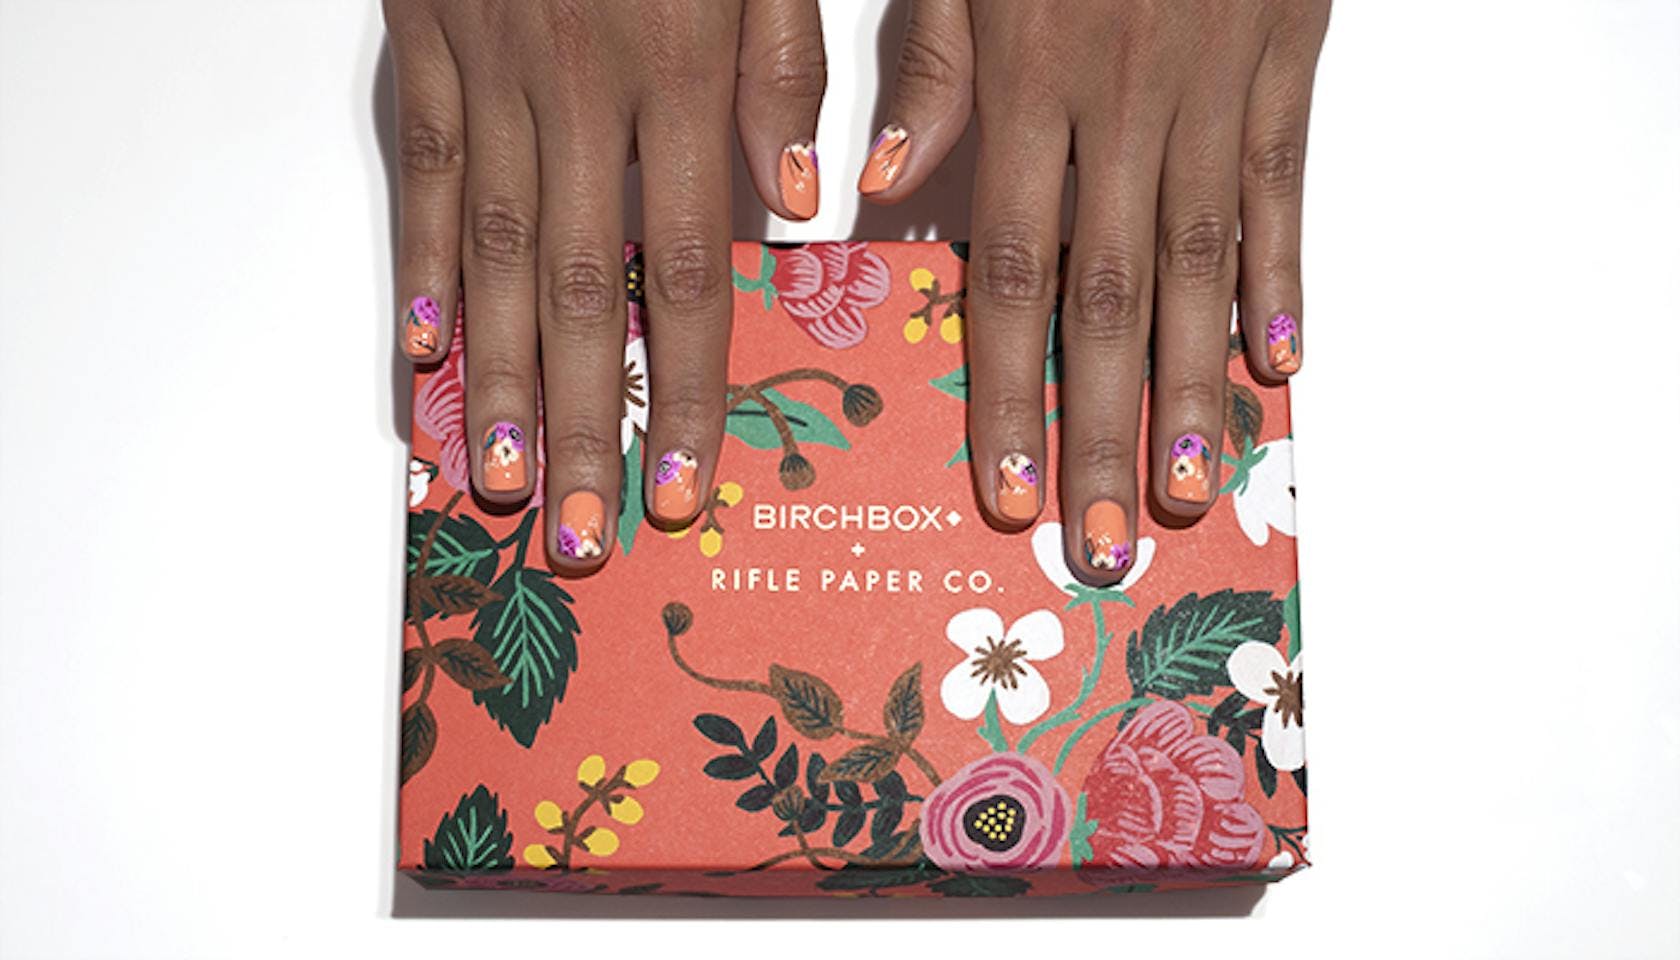 10. Sunflower Coffin Nails for a Bright and Cheery Look - wide 5